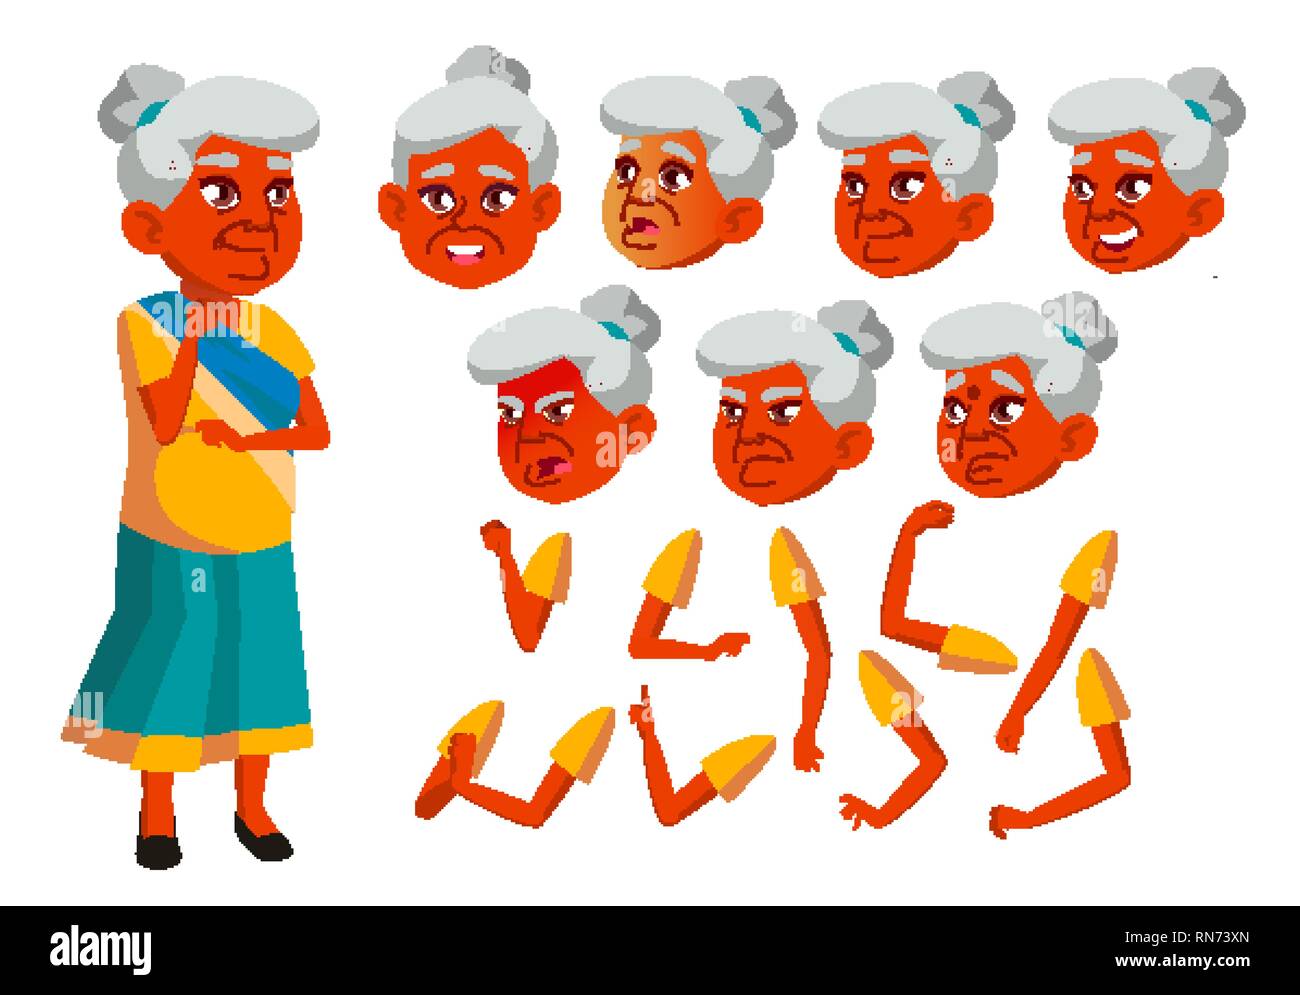 Indian Old Woman Vector. Senior Person. Aged, Elderly People. Positive. Face Emotions, Various Gestures. Animation Creation Set. Isolated Flat Cartoon Stock Vector